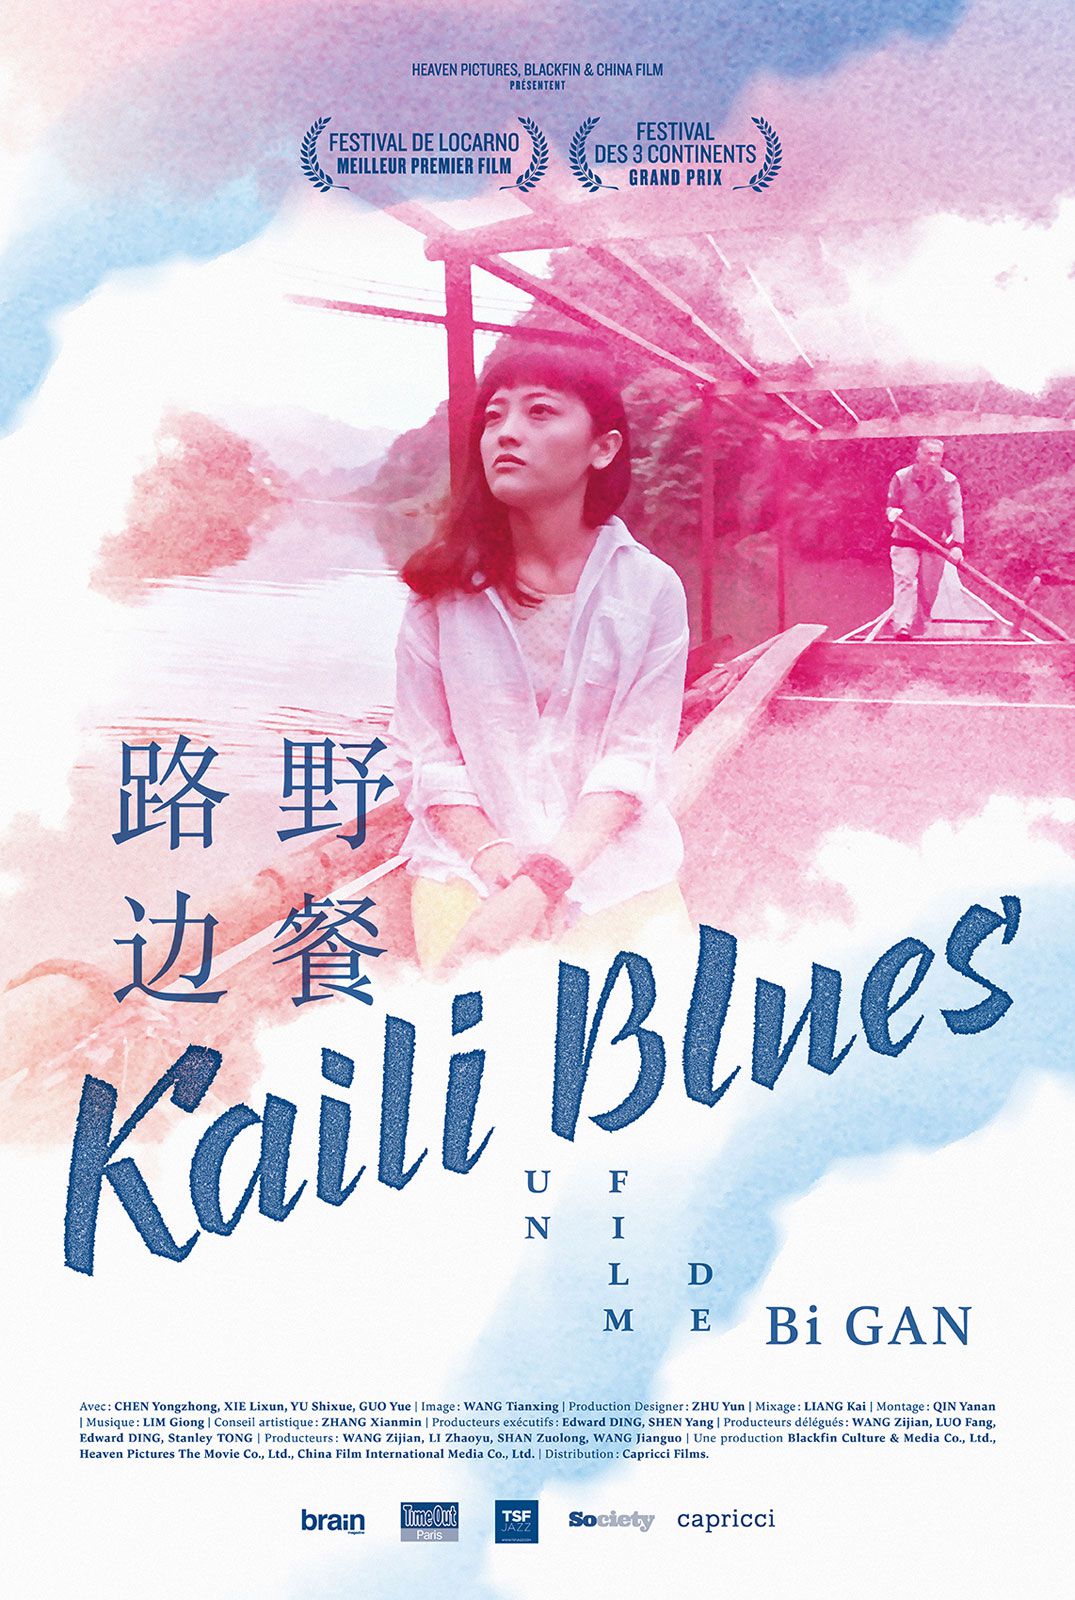 Kaili Blues - Film (2015) streaming VF gratuit complet